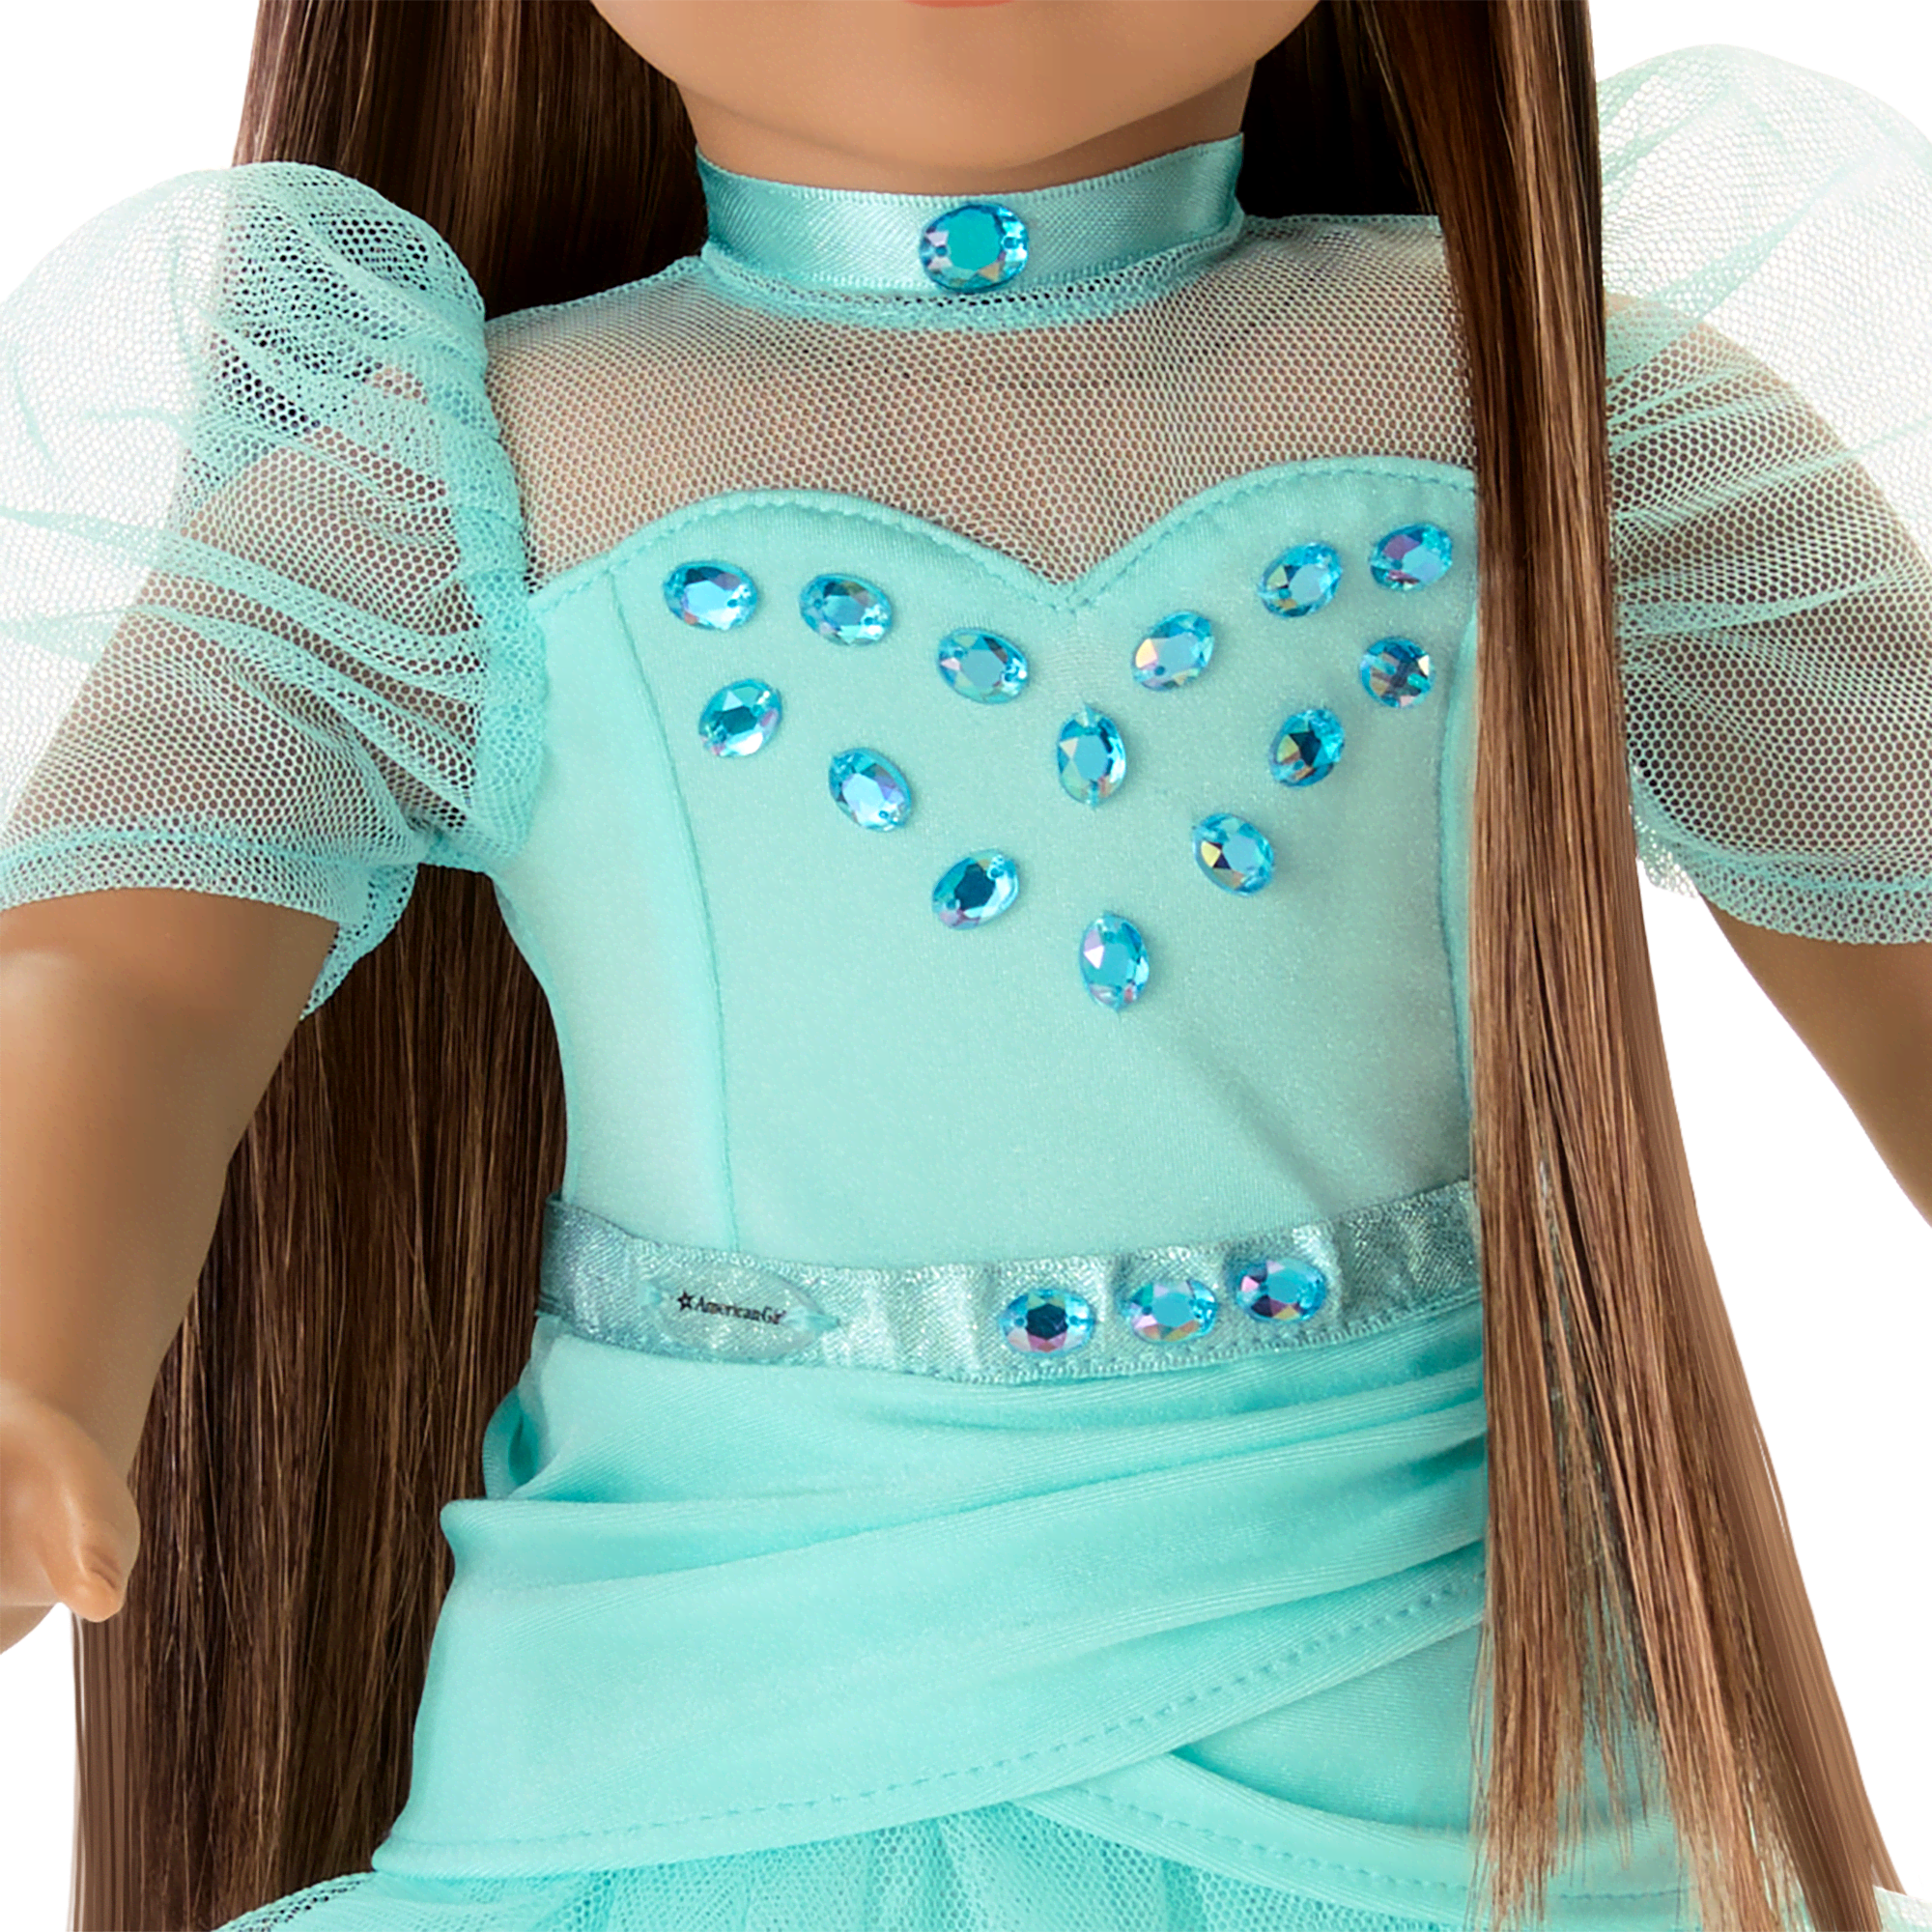 March Gleaming Aquamarine Outfit for 18-inch Dolls